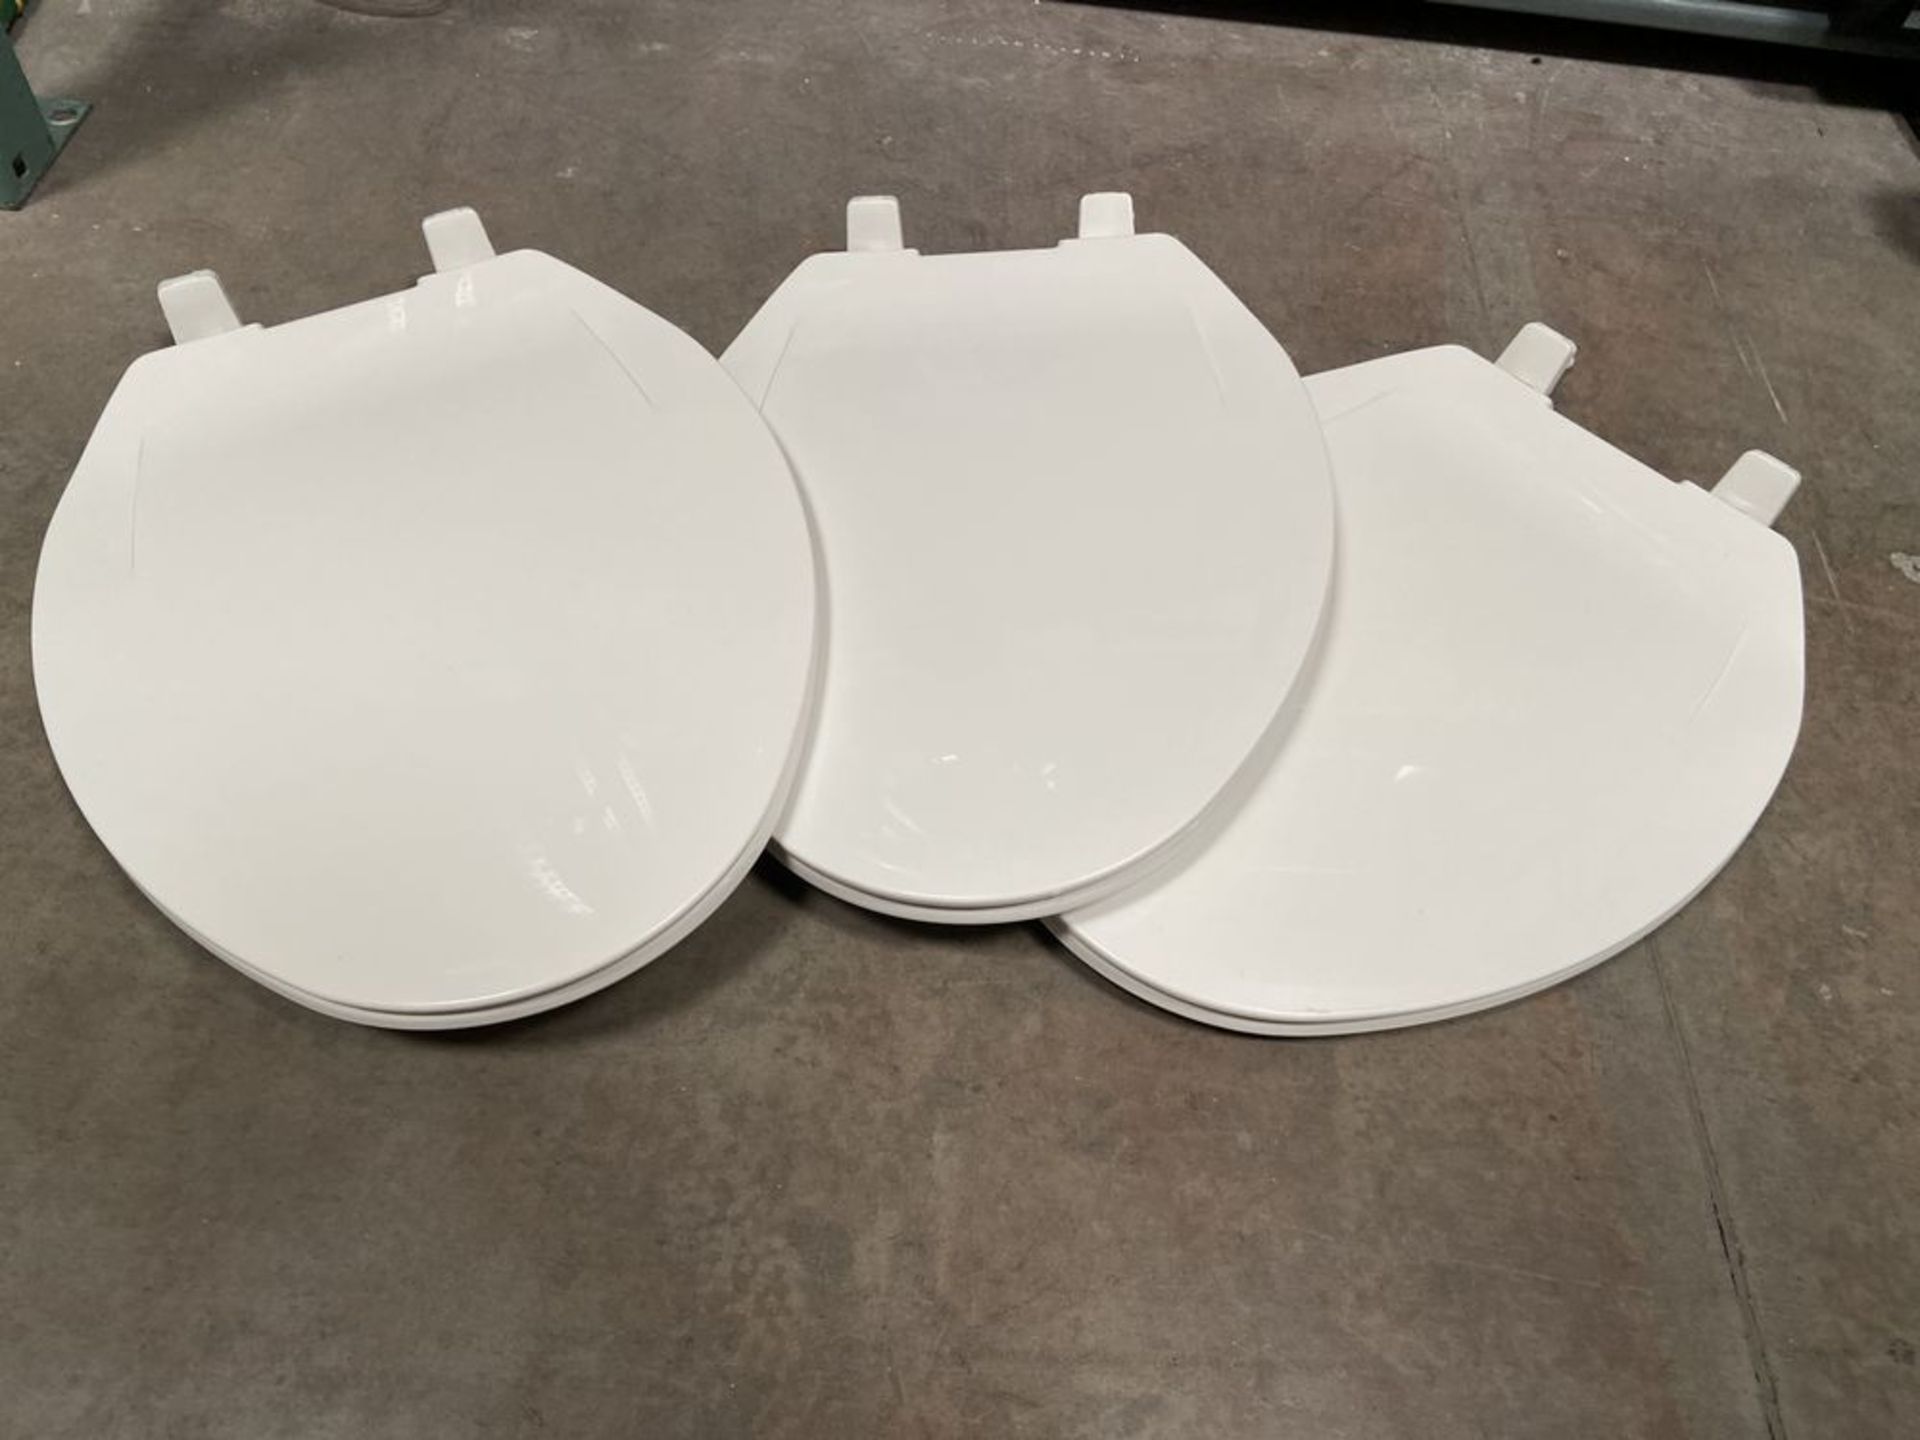 3 Brand New Toilet Seat covers